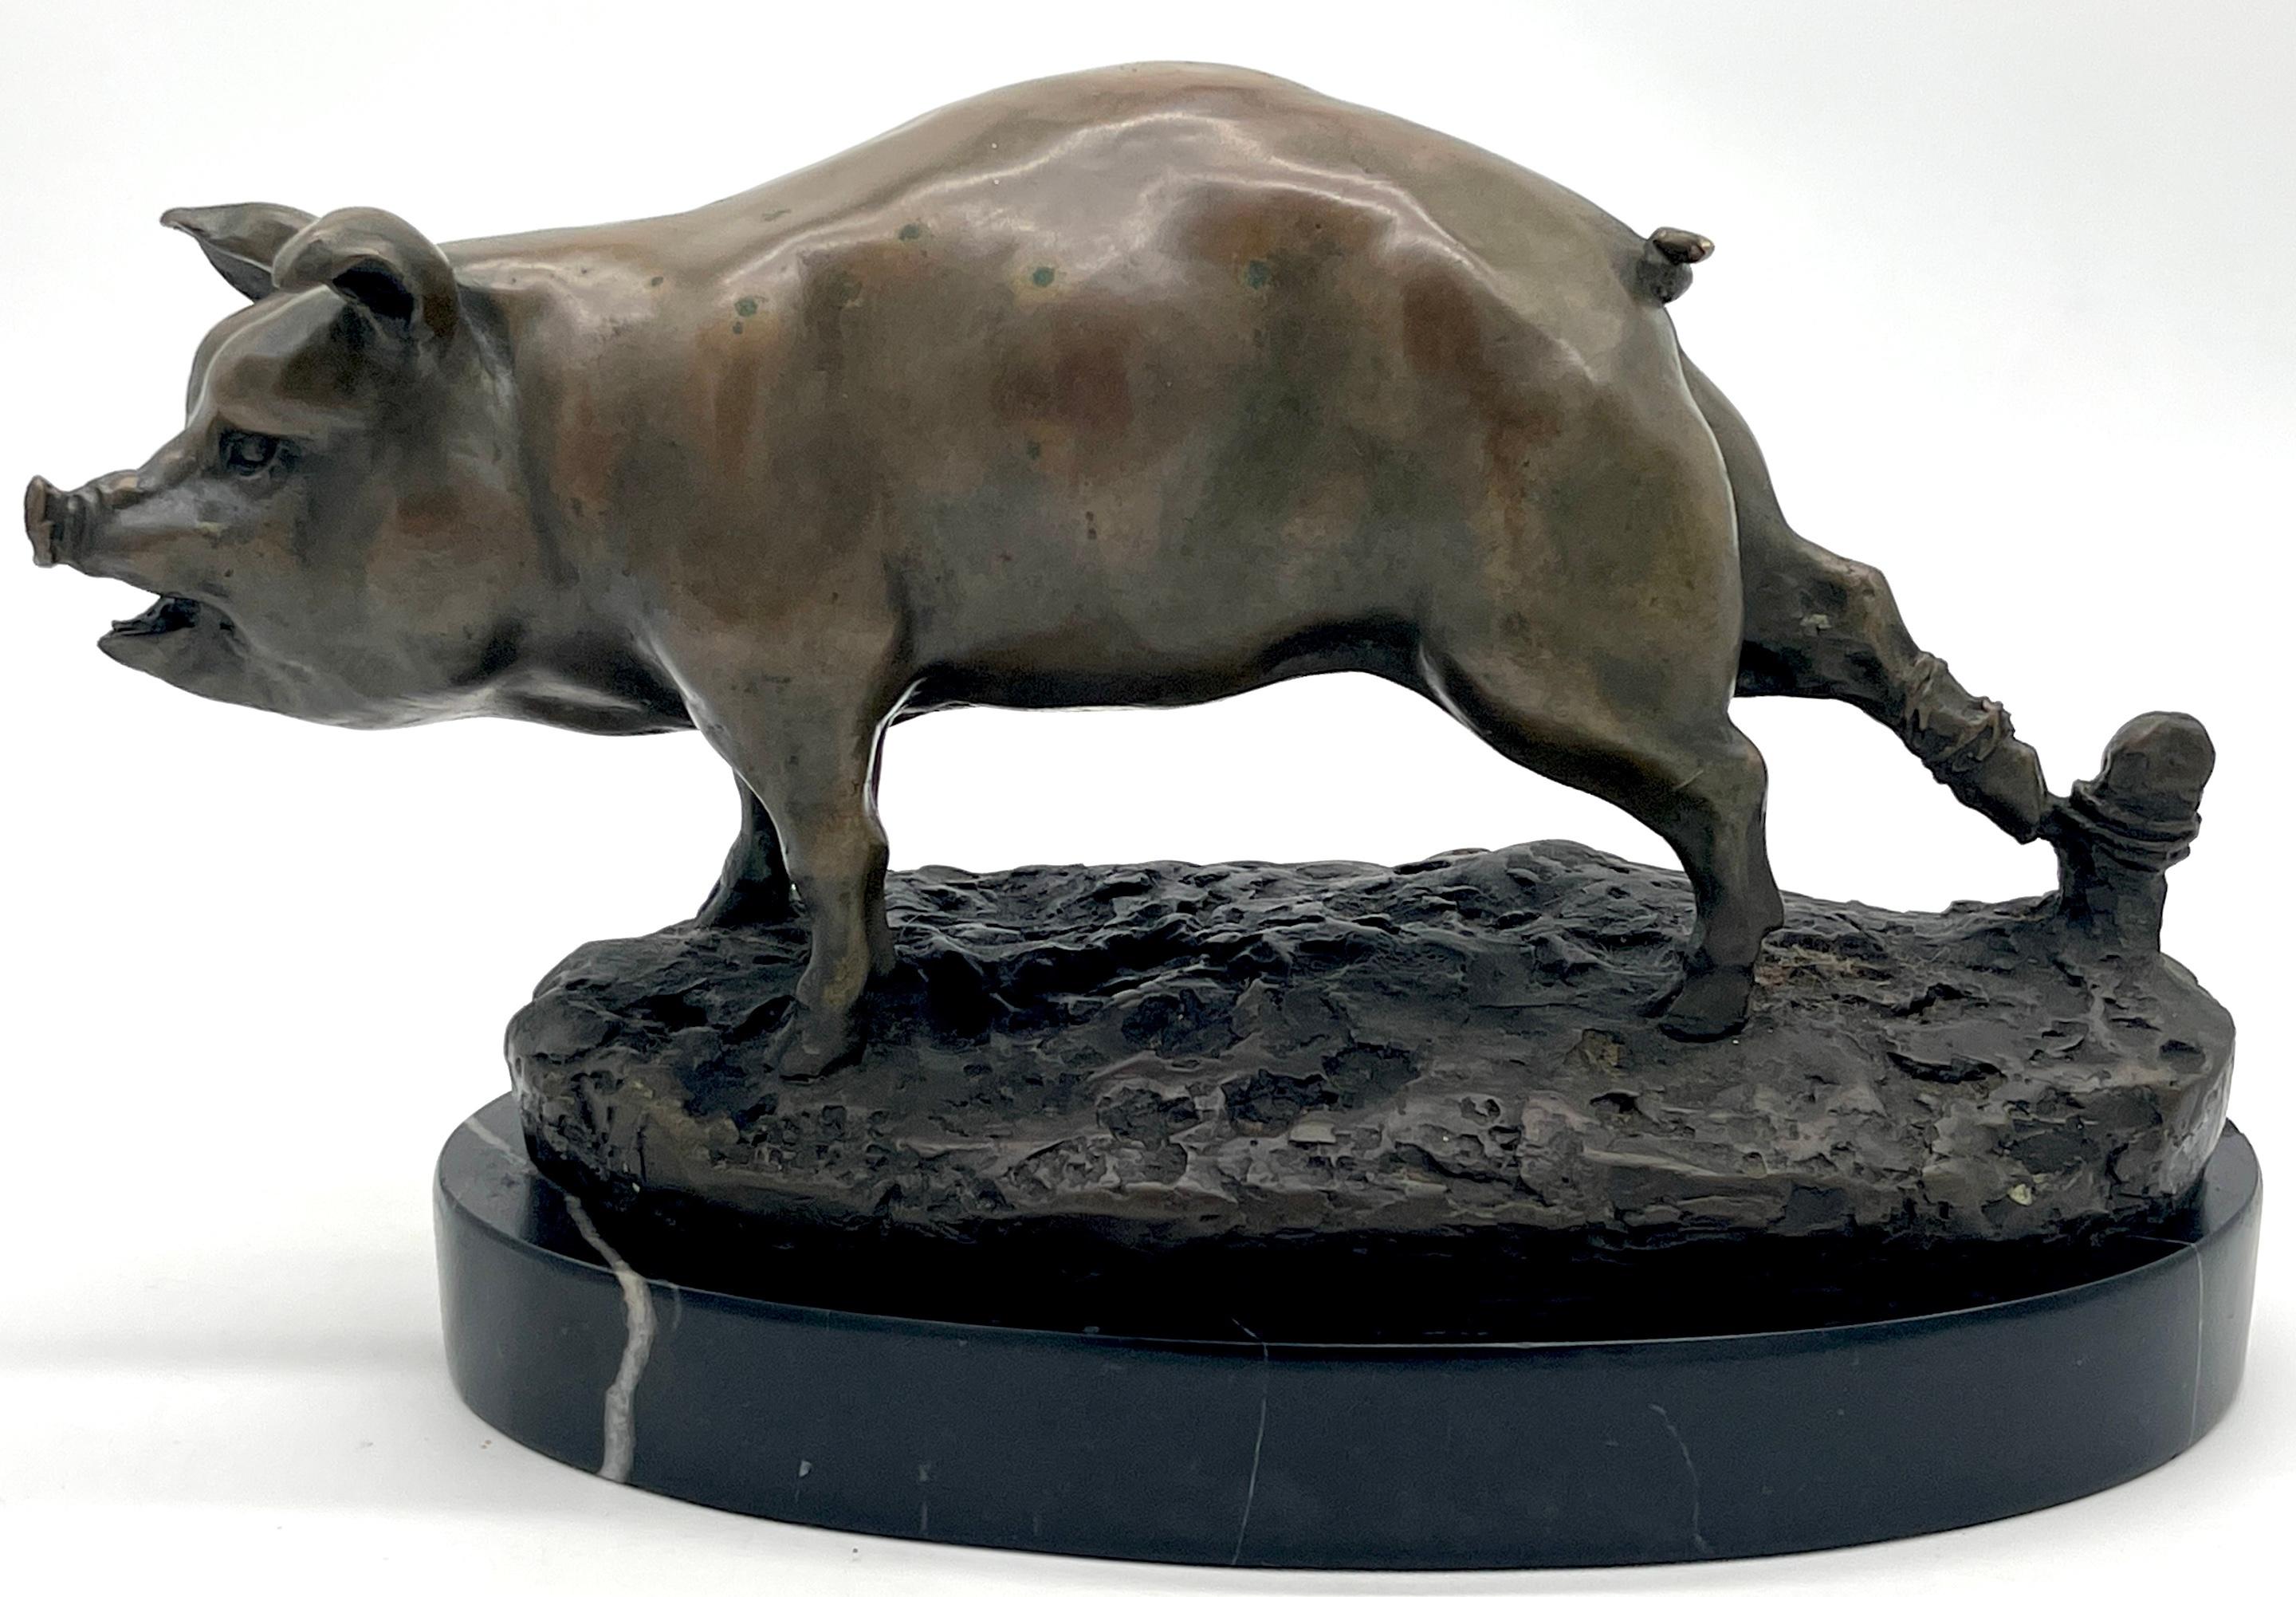 French School Animalier Sculpture Bronze of a Roped Prize Pig
20th Century France, Signed 'Barex'

This 20th-century French School Bronze Animalier Sculpture, signed 'Barex,' captures a scene reminiscent of the esteemed 19th-century French sculptor